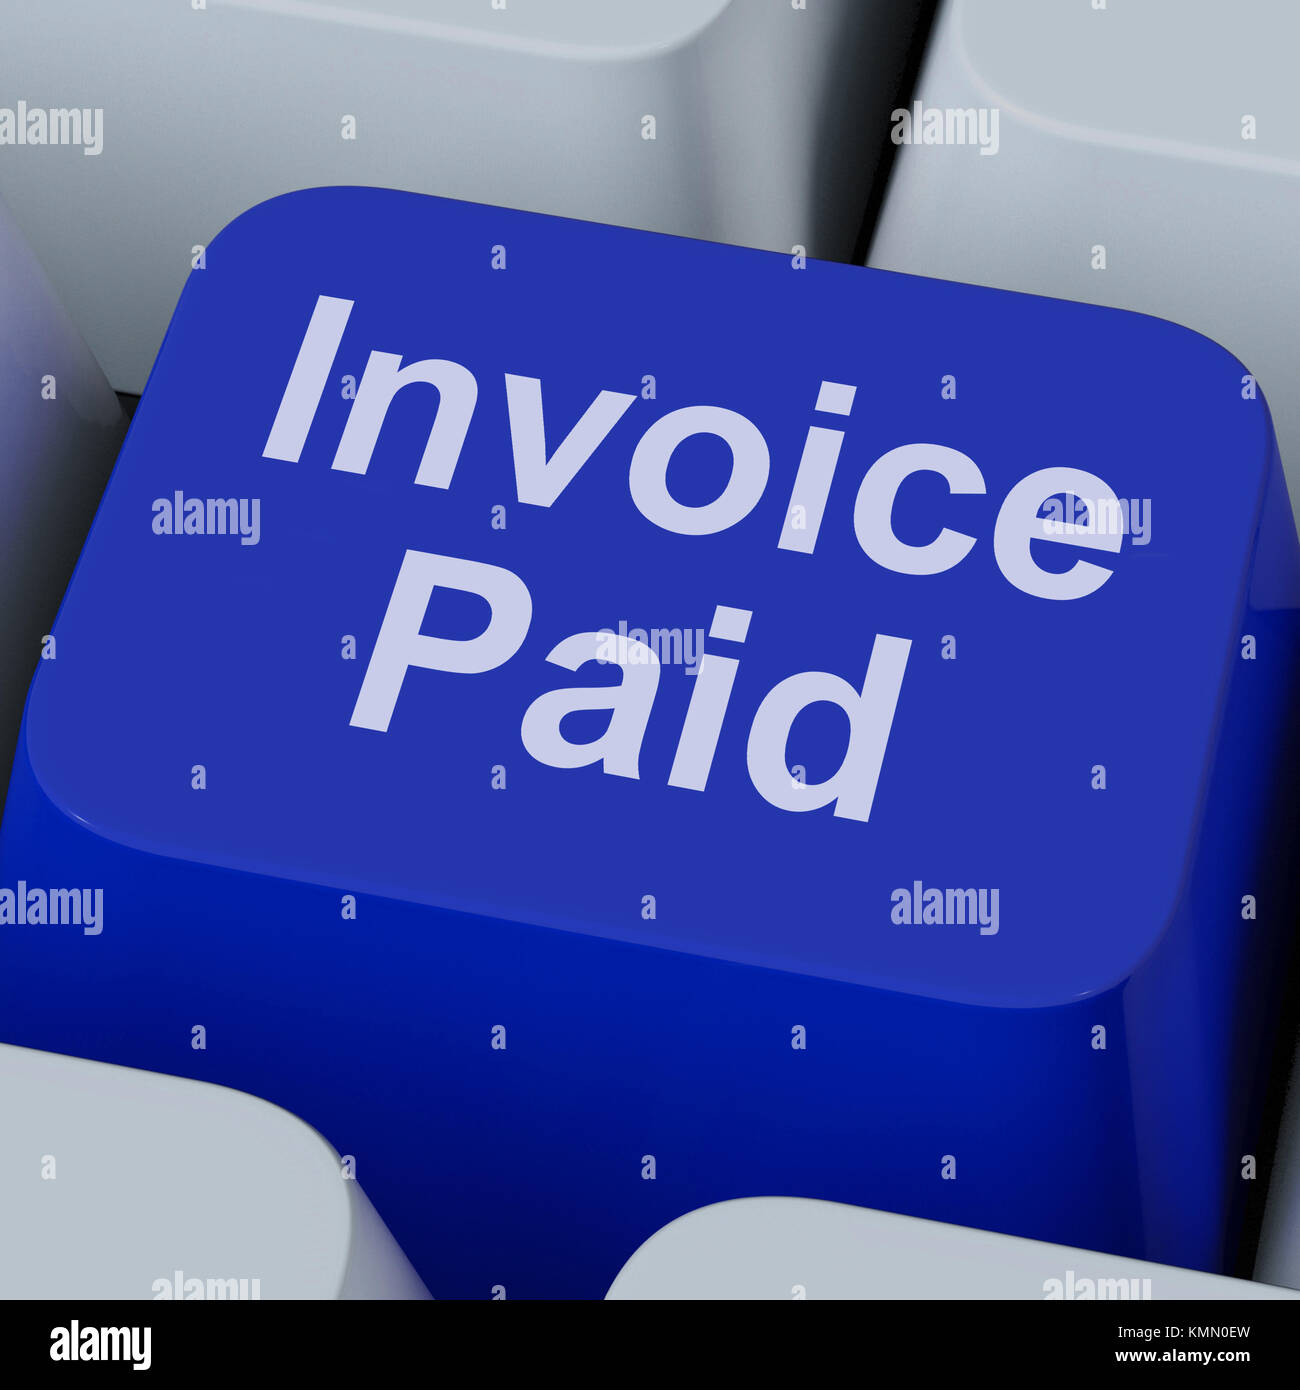 Invoice Paid Key Showing Bill Payment Made Stock Photo